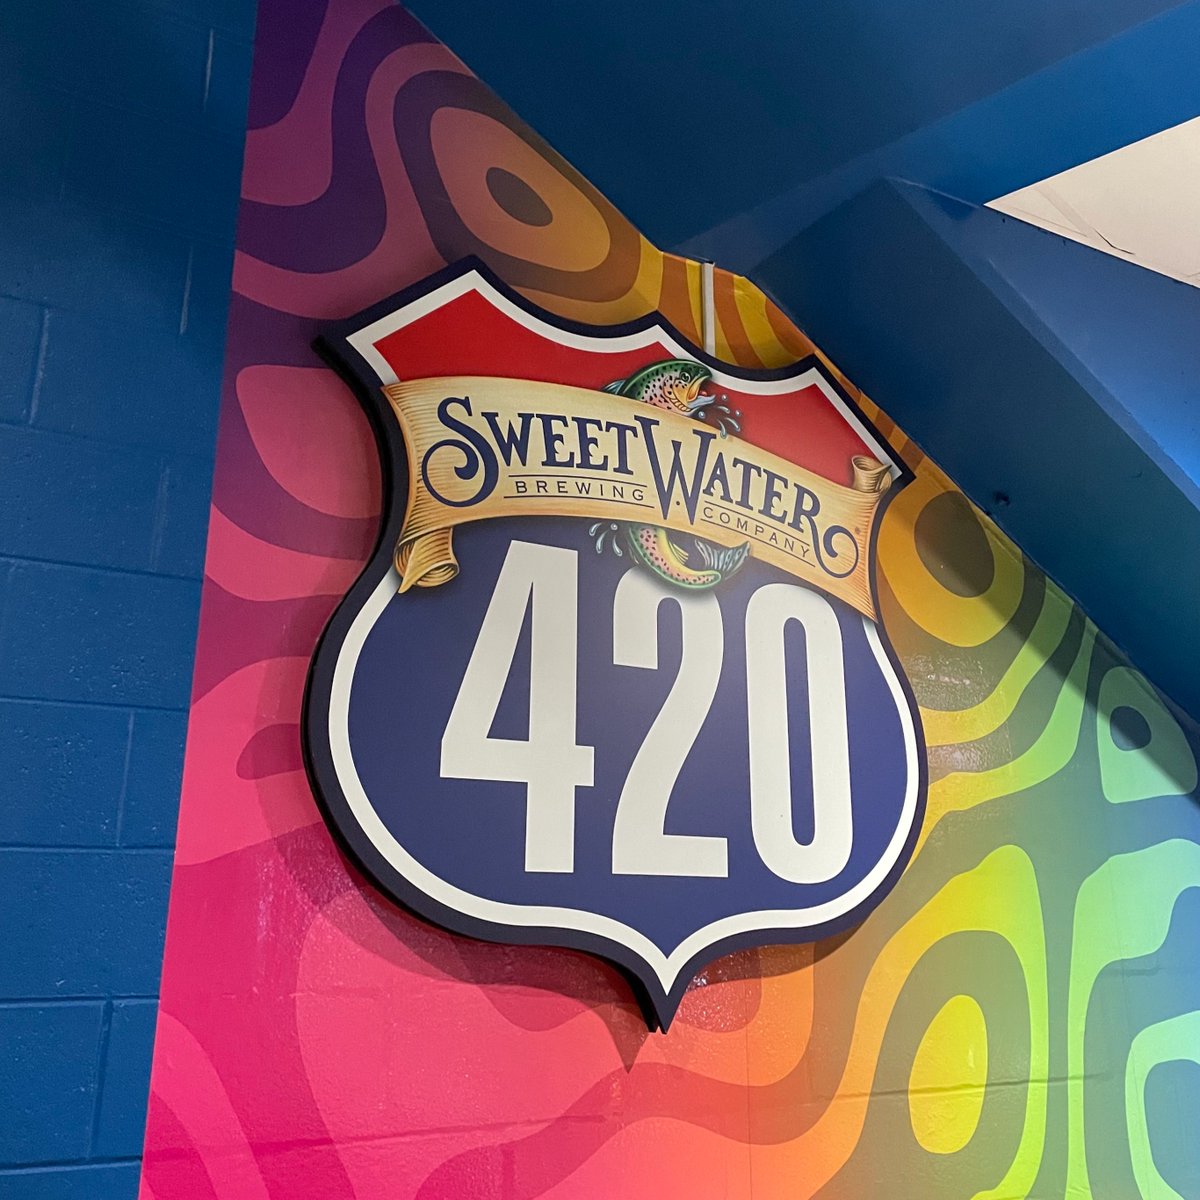 Ah, the real first sign of spring, from the queen of the north herself. It's officially #420Fest szn fam!